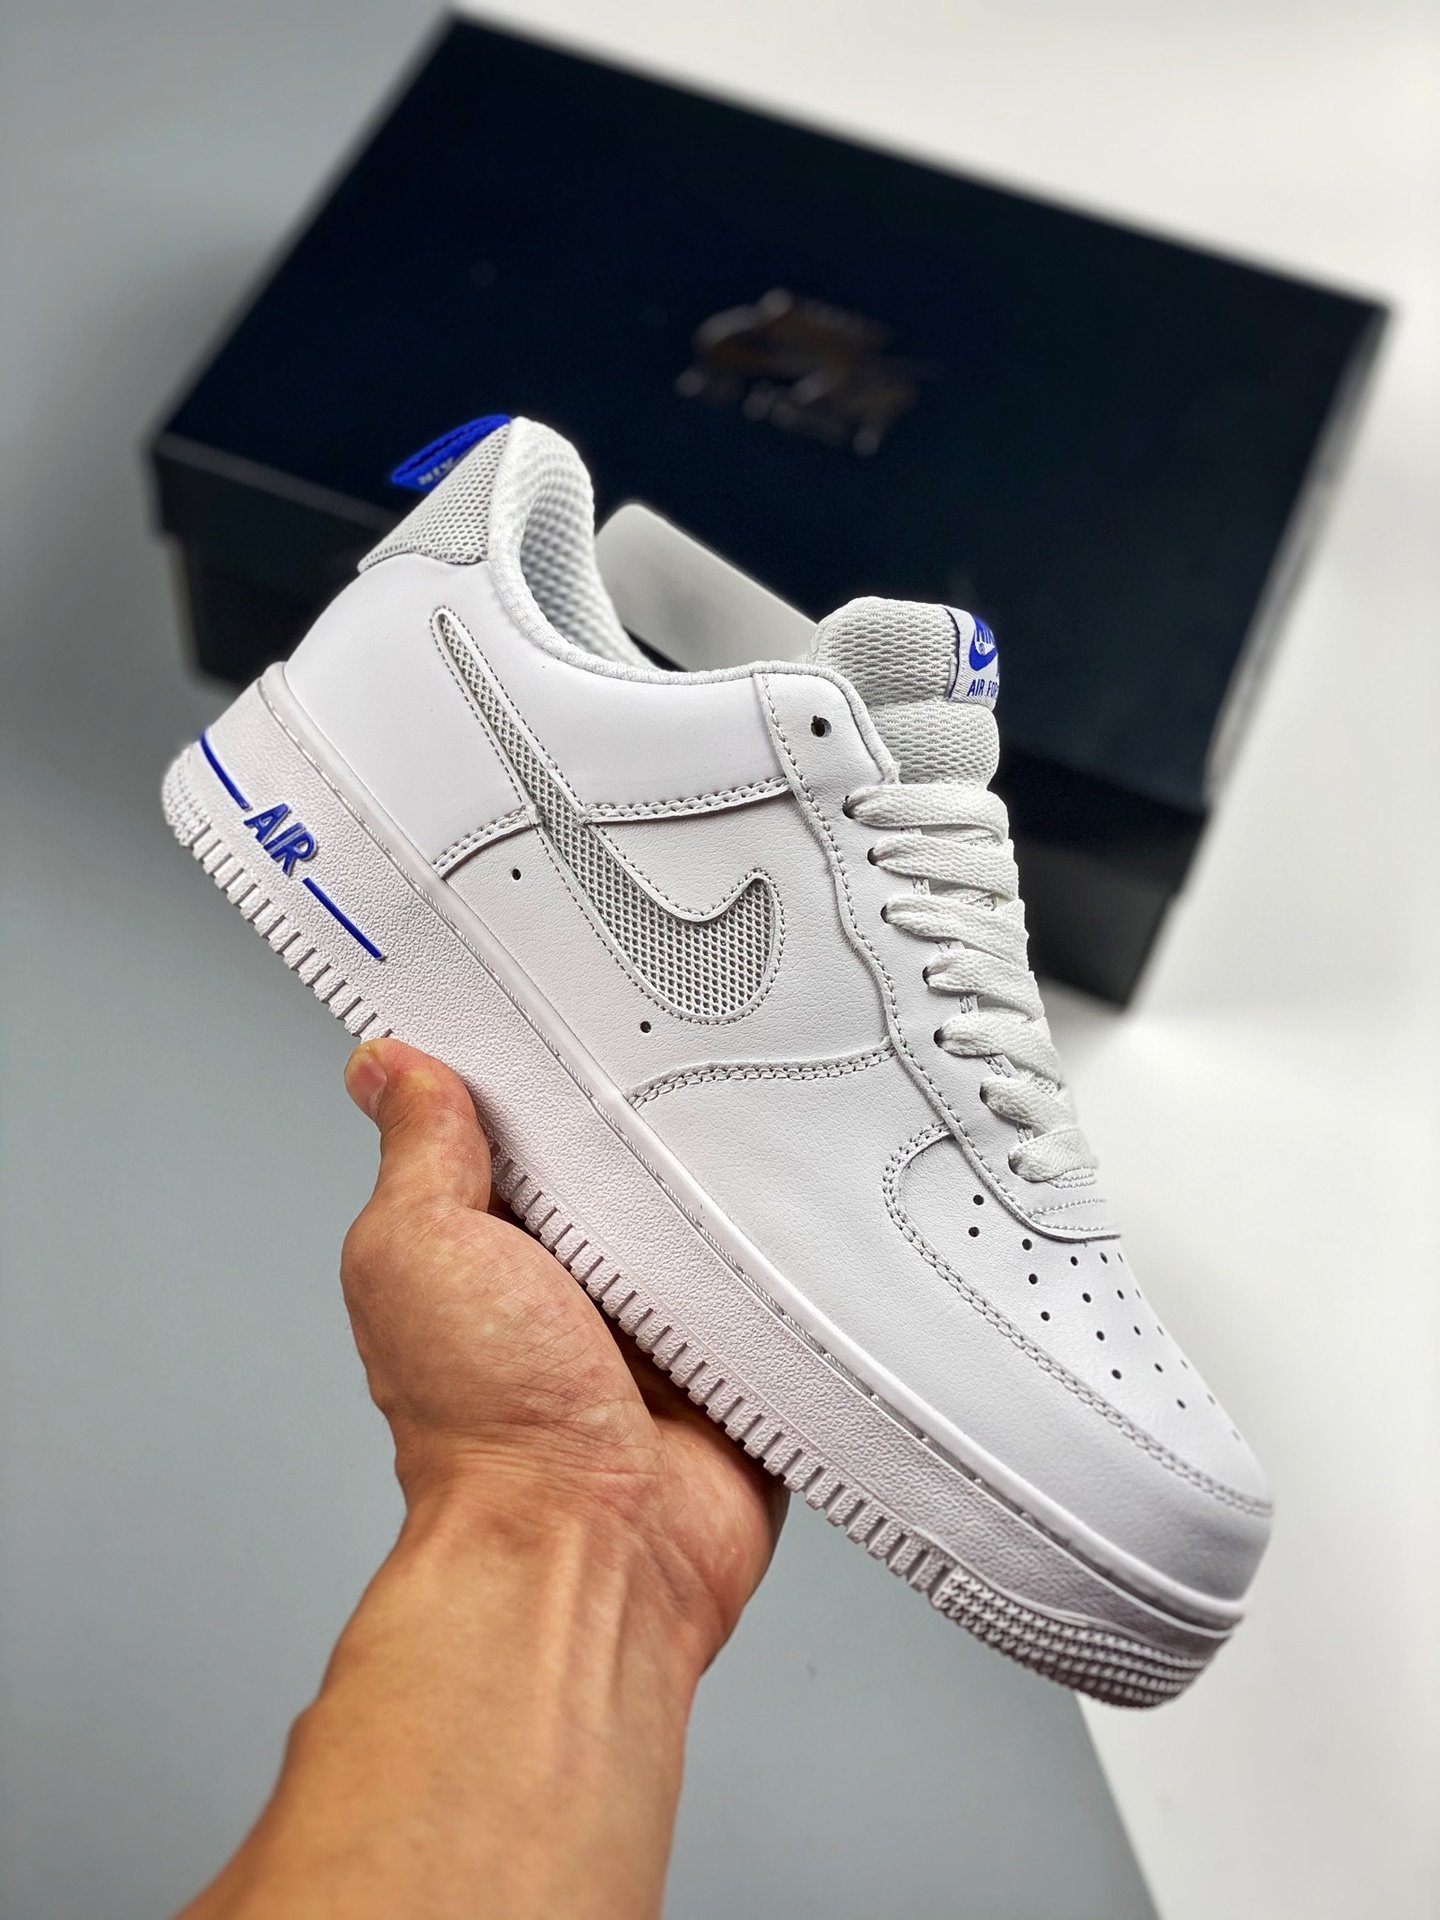 Nike Air AF Force 1 Low "Cut-Out" White Shoes